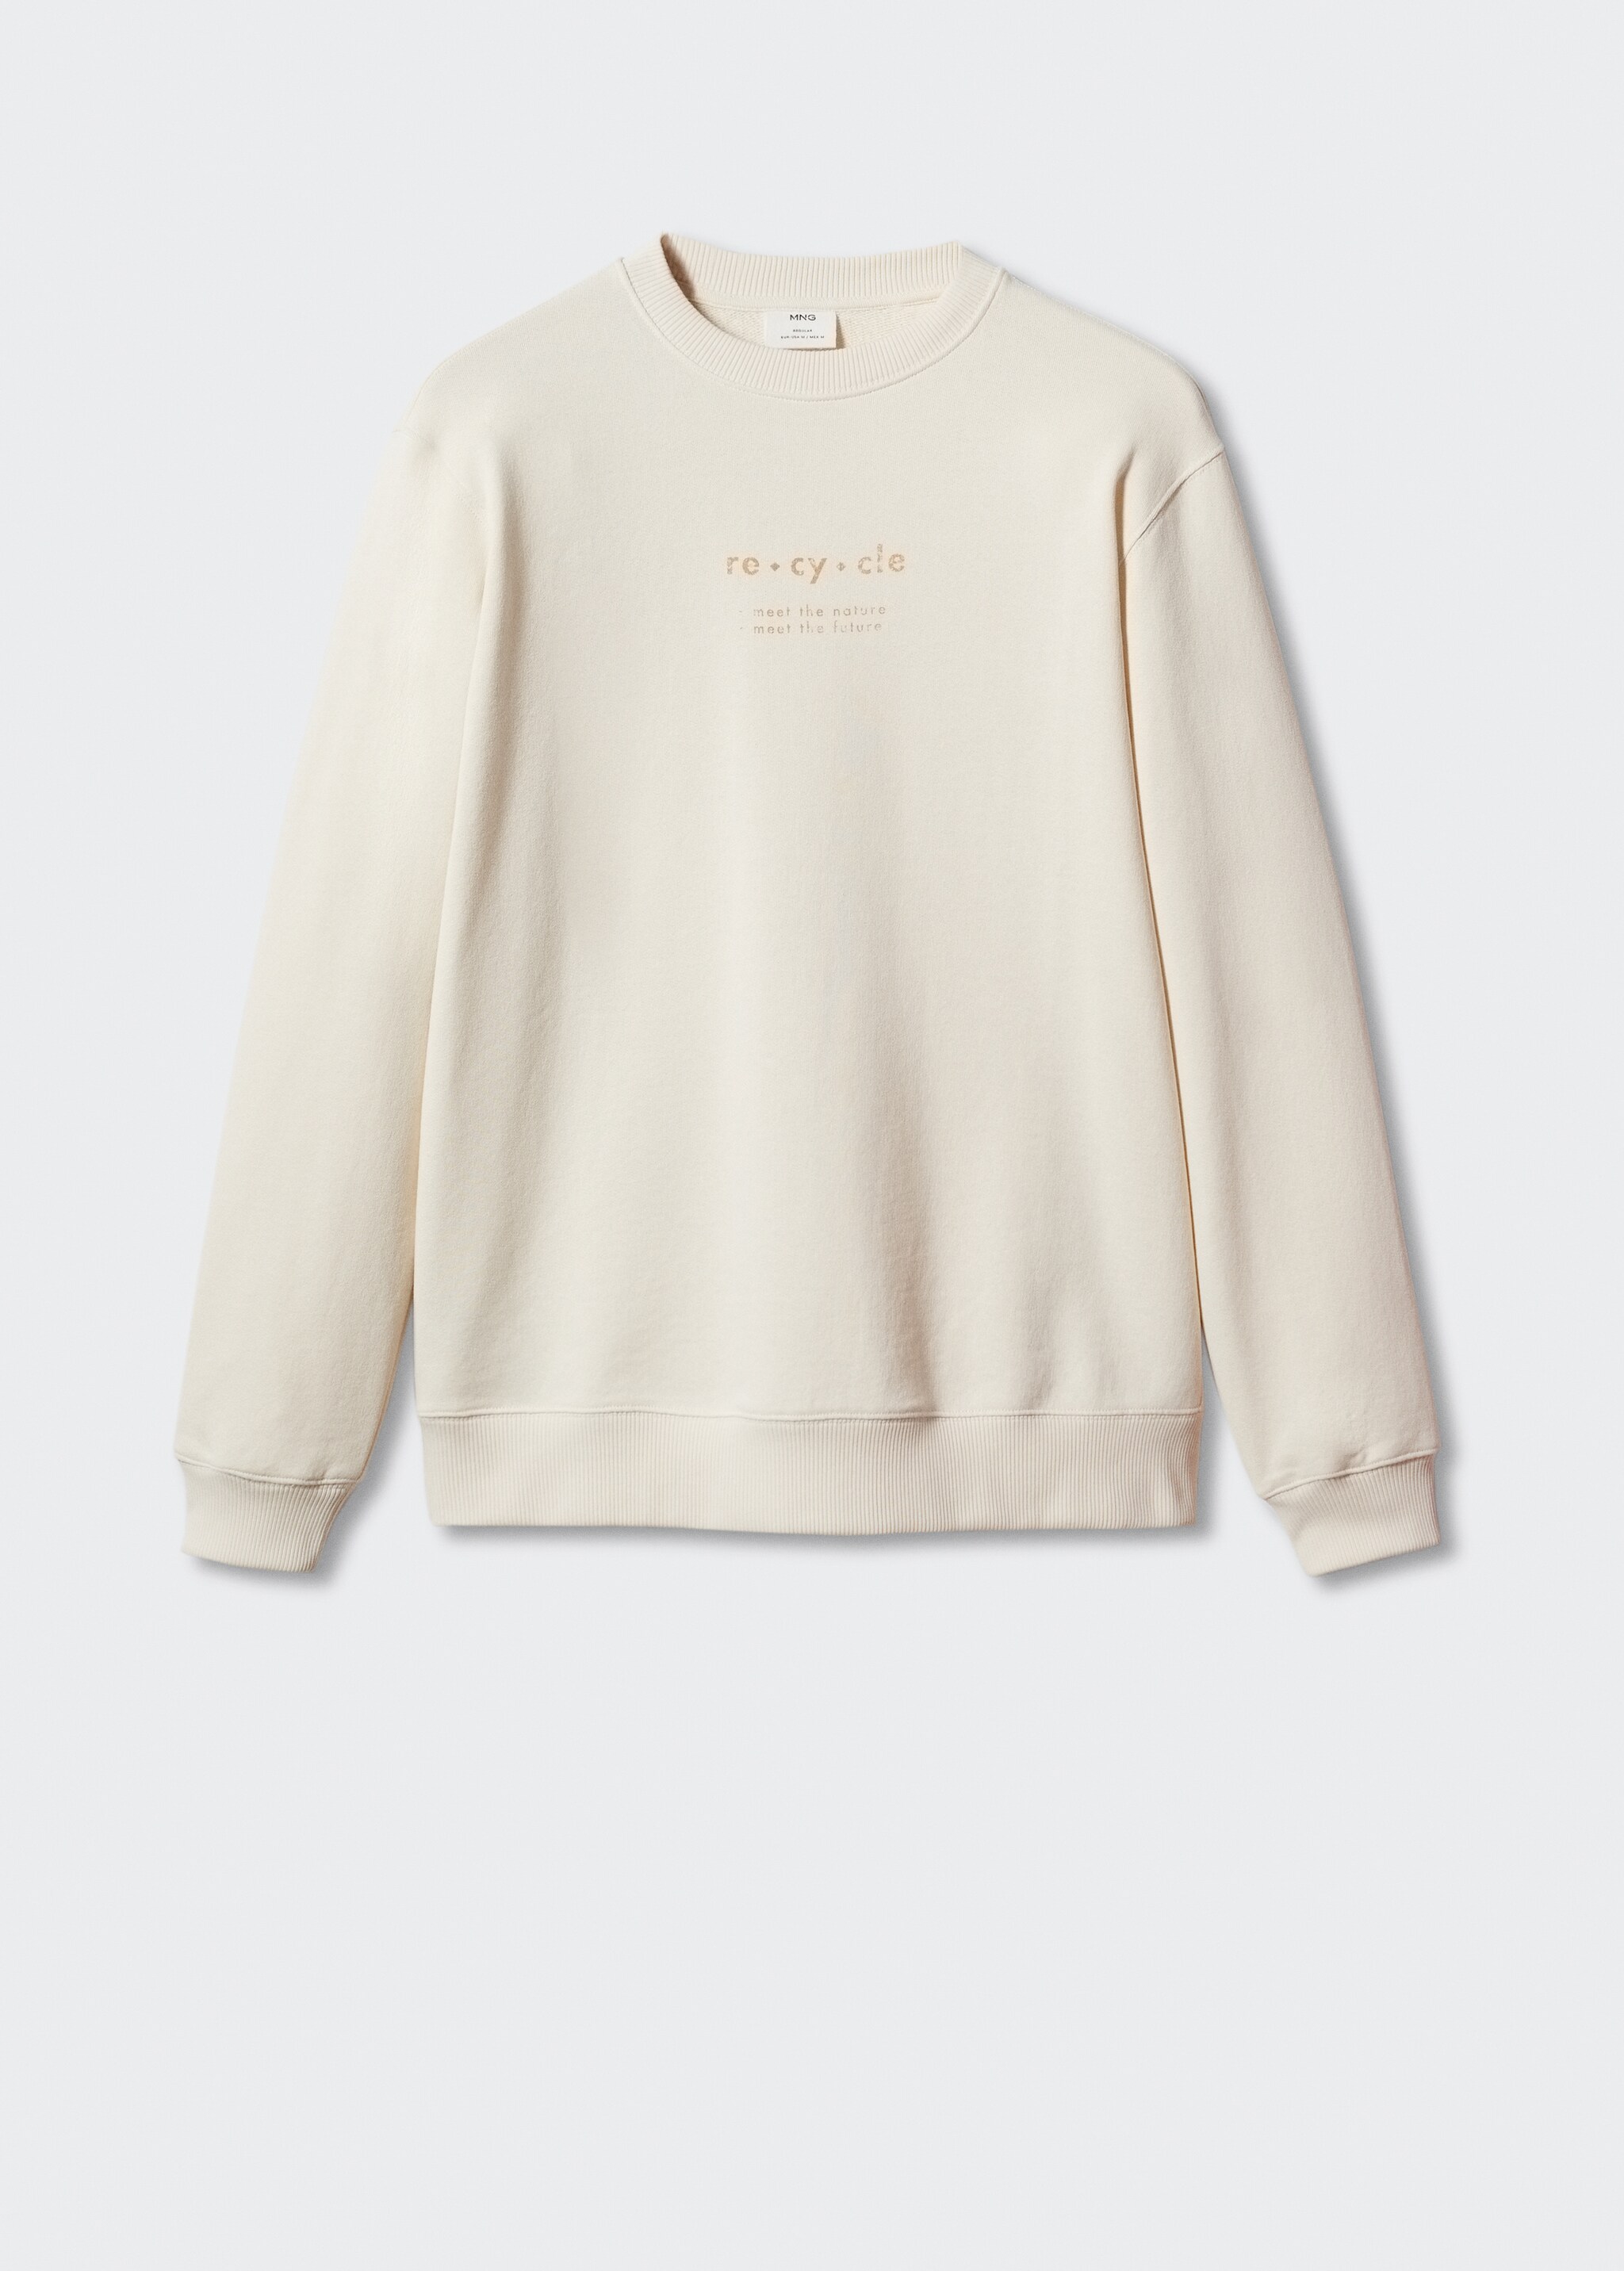 100% cotton sweatshirt text - Article without model